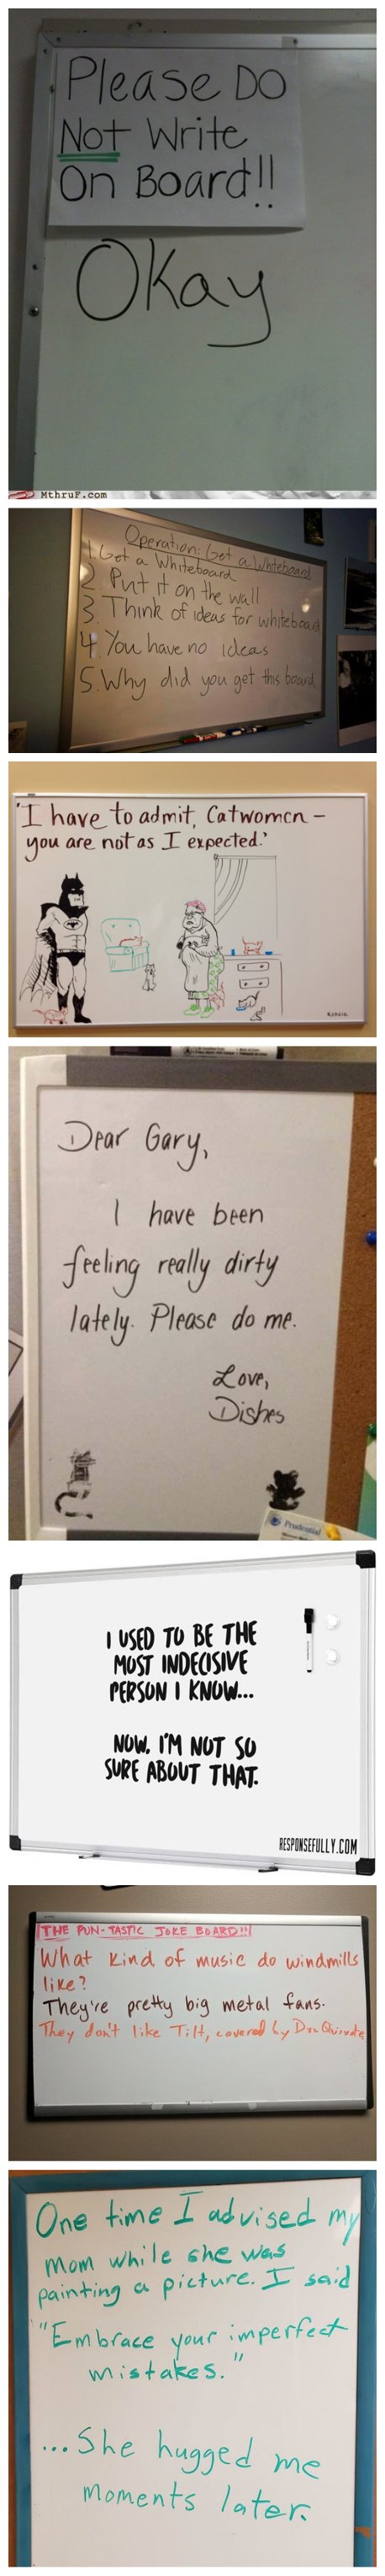 hilarious-whiteboards-collection-new.jpg